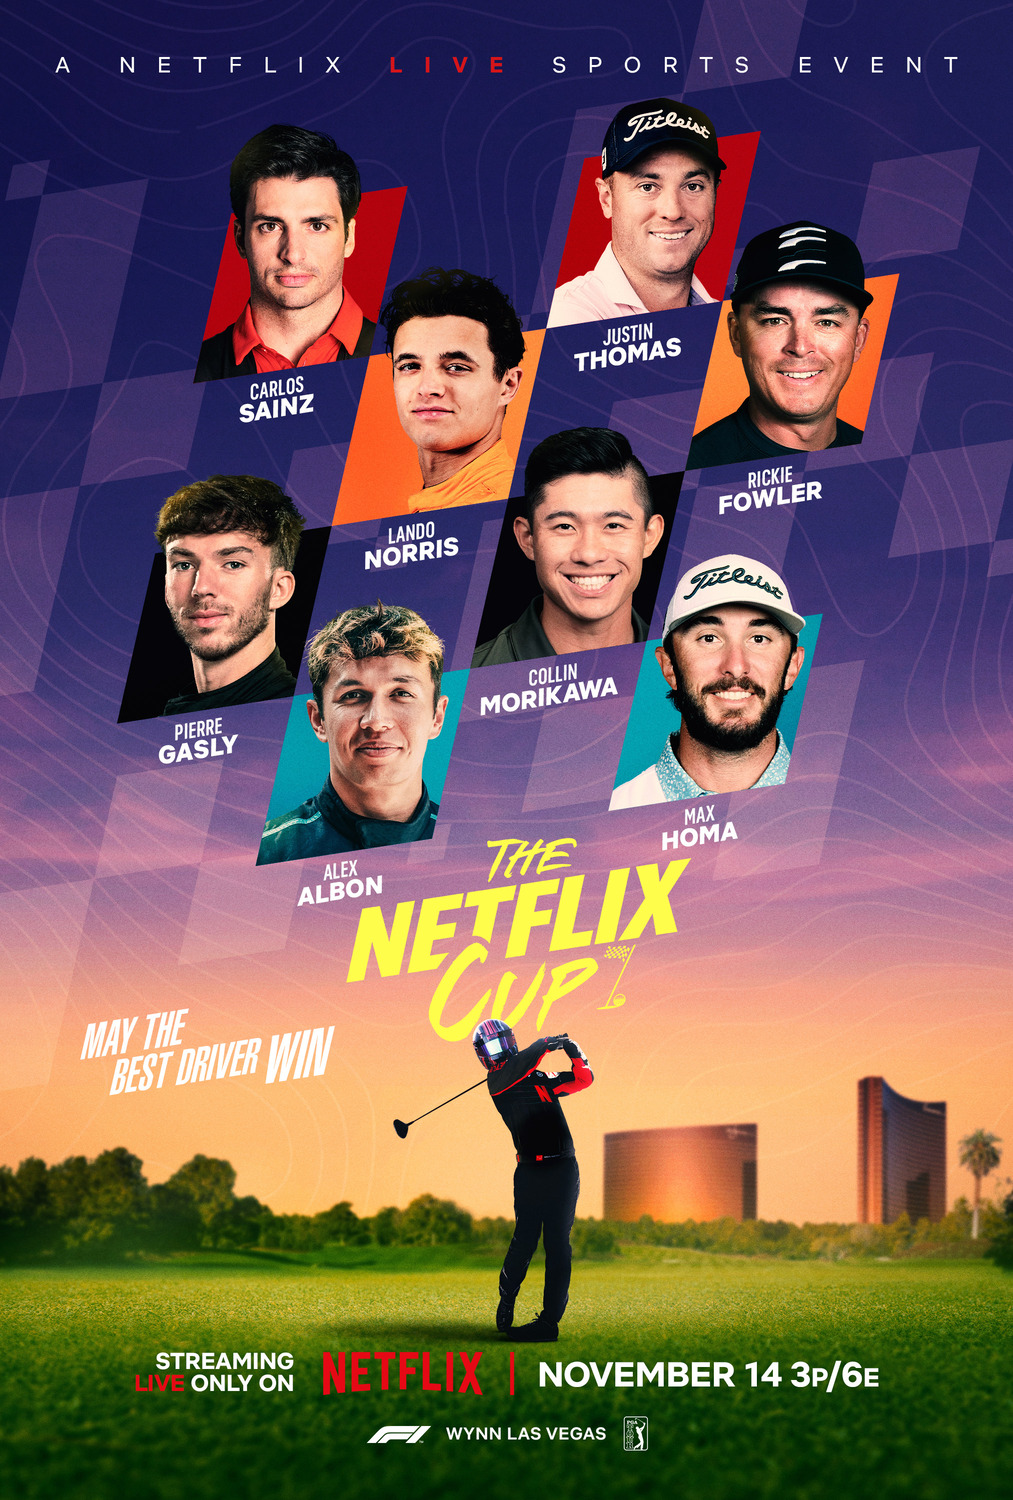 Extra Large TV Poster Image for The Netflix Cup (#2 of 3)